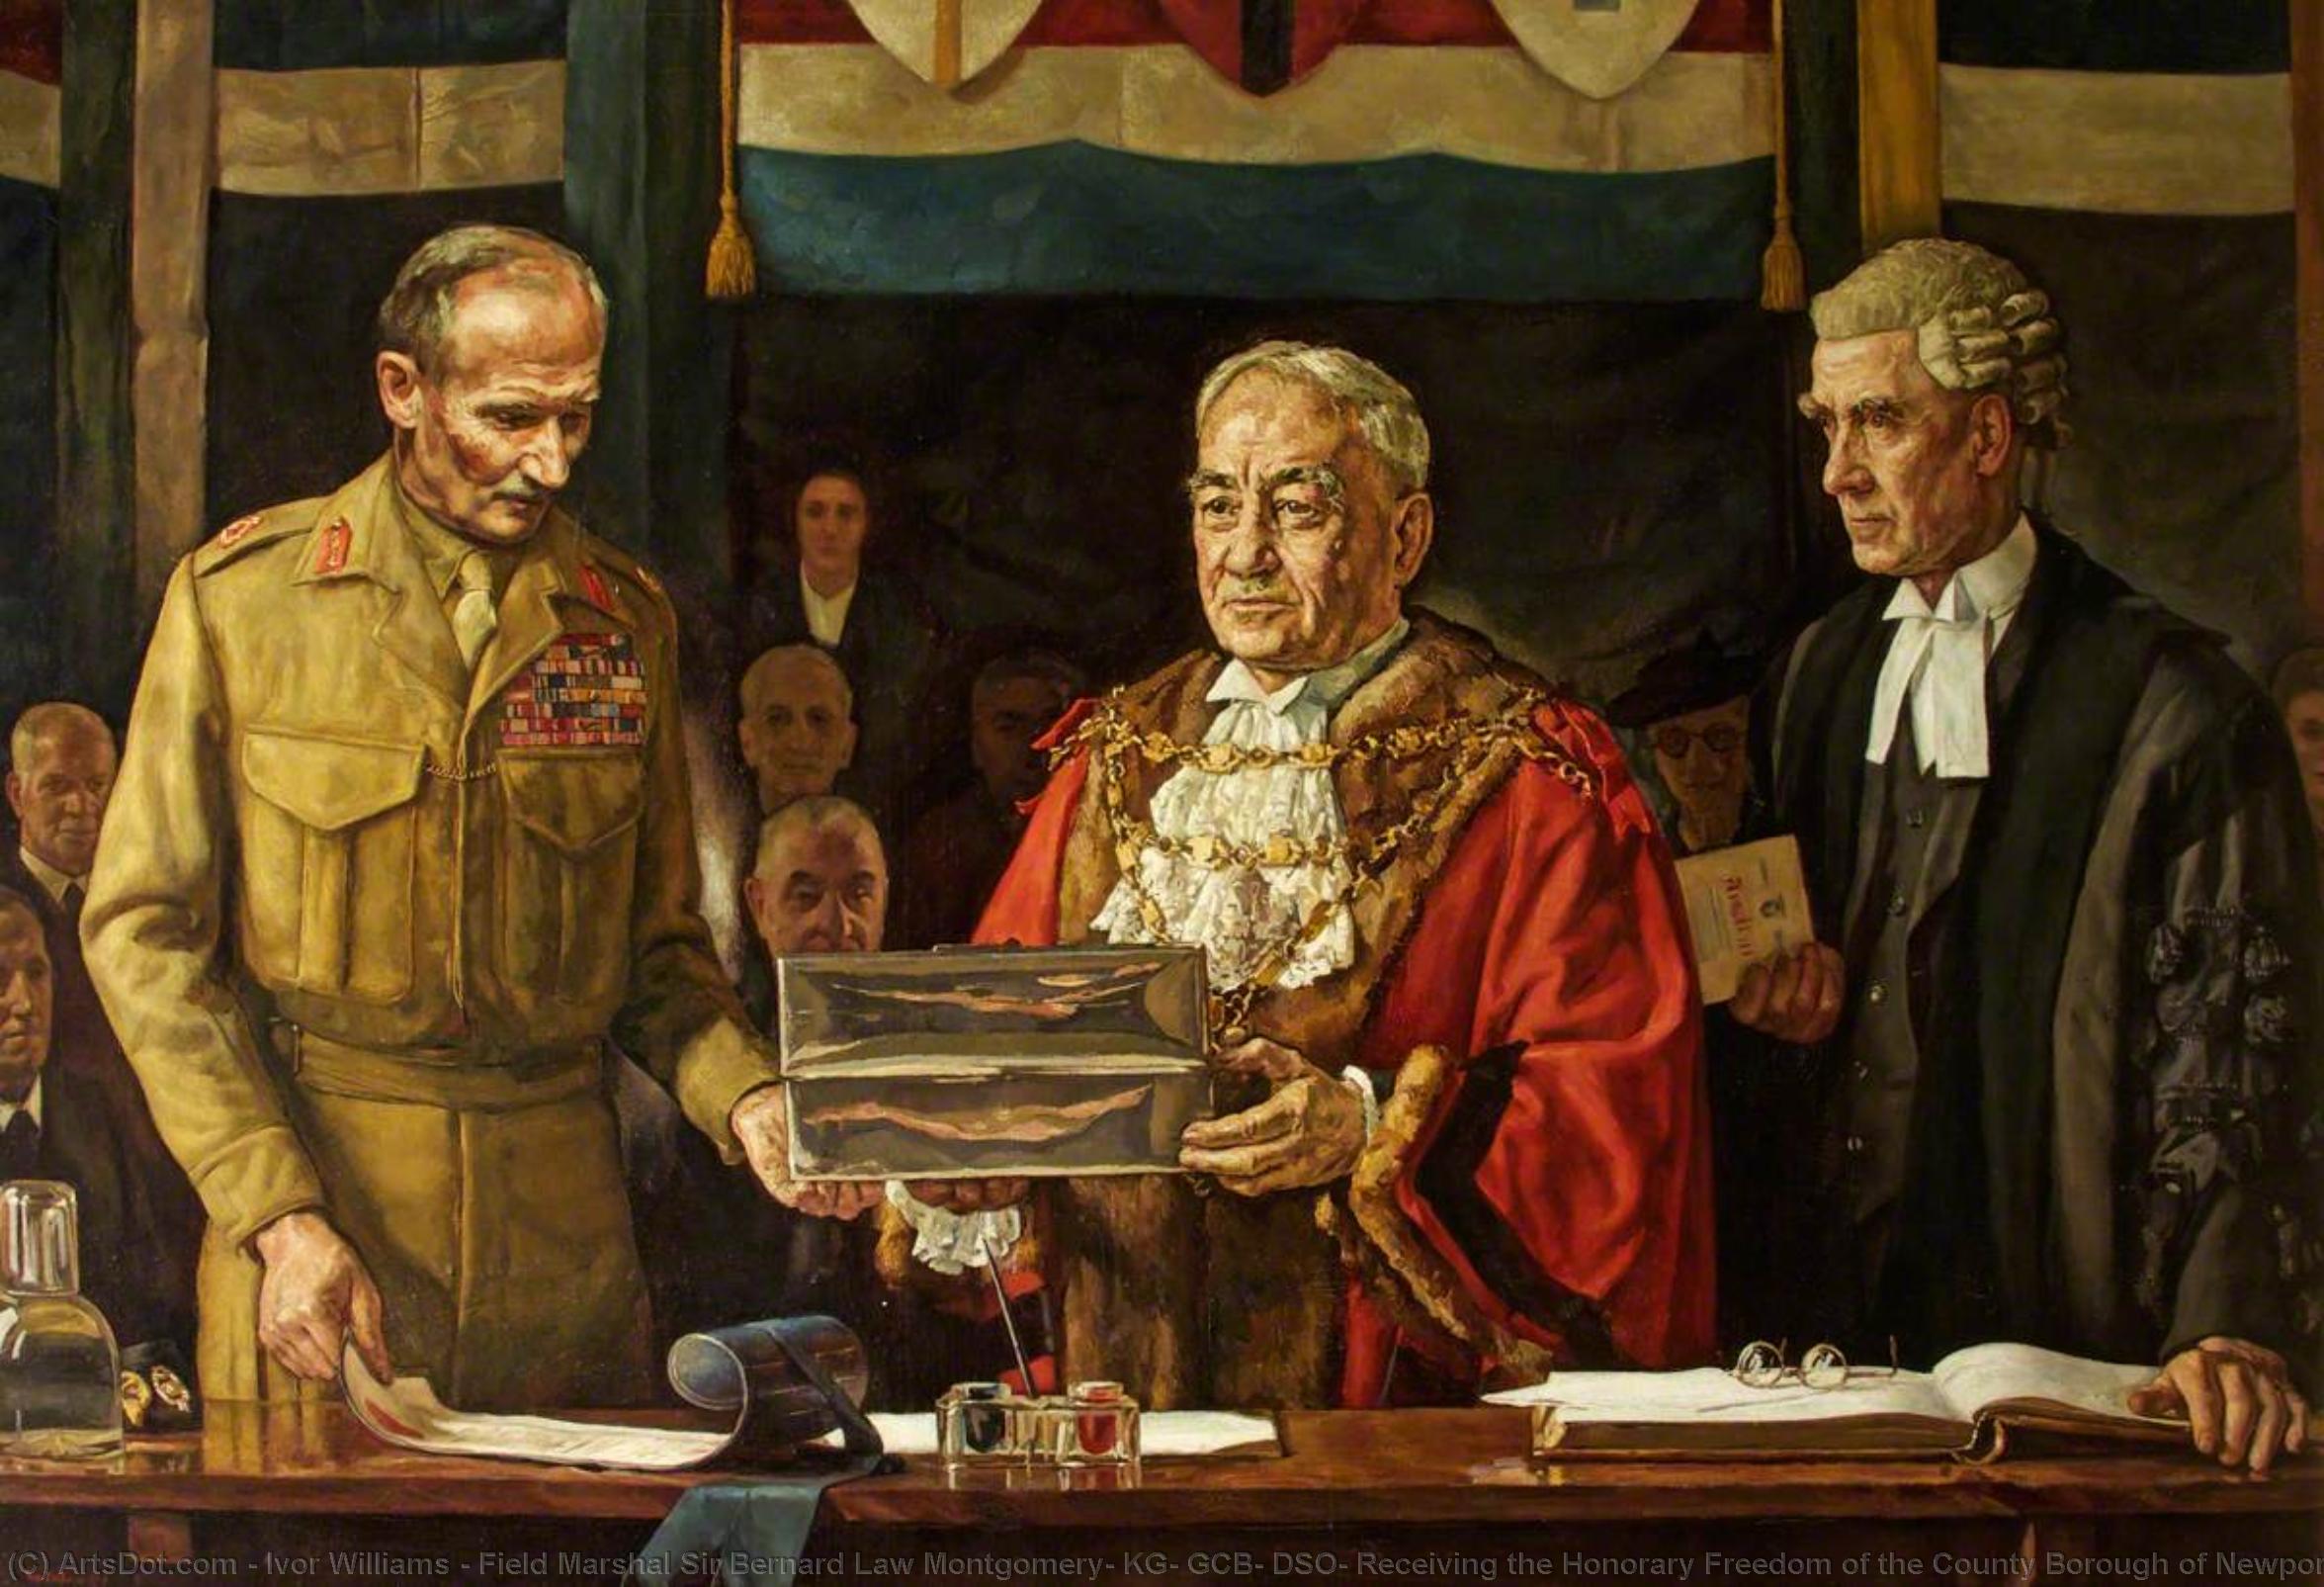 WikiOO.org - Encyclopedia of Fine Arts - Malba, Artwork Ivor Williams - Field Marshal Sir Bernard Law Montgomery, KG, GCB, DSO, Receiving the Honorary Freedom of the County Borough of Newport, 25th September 1945